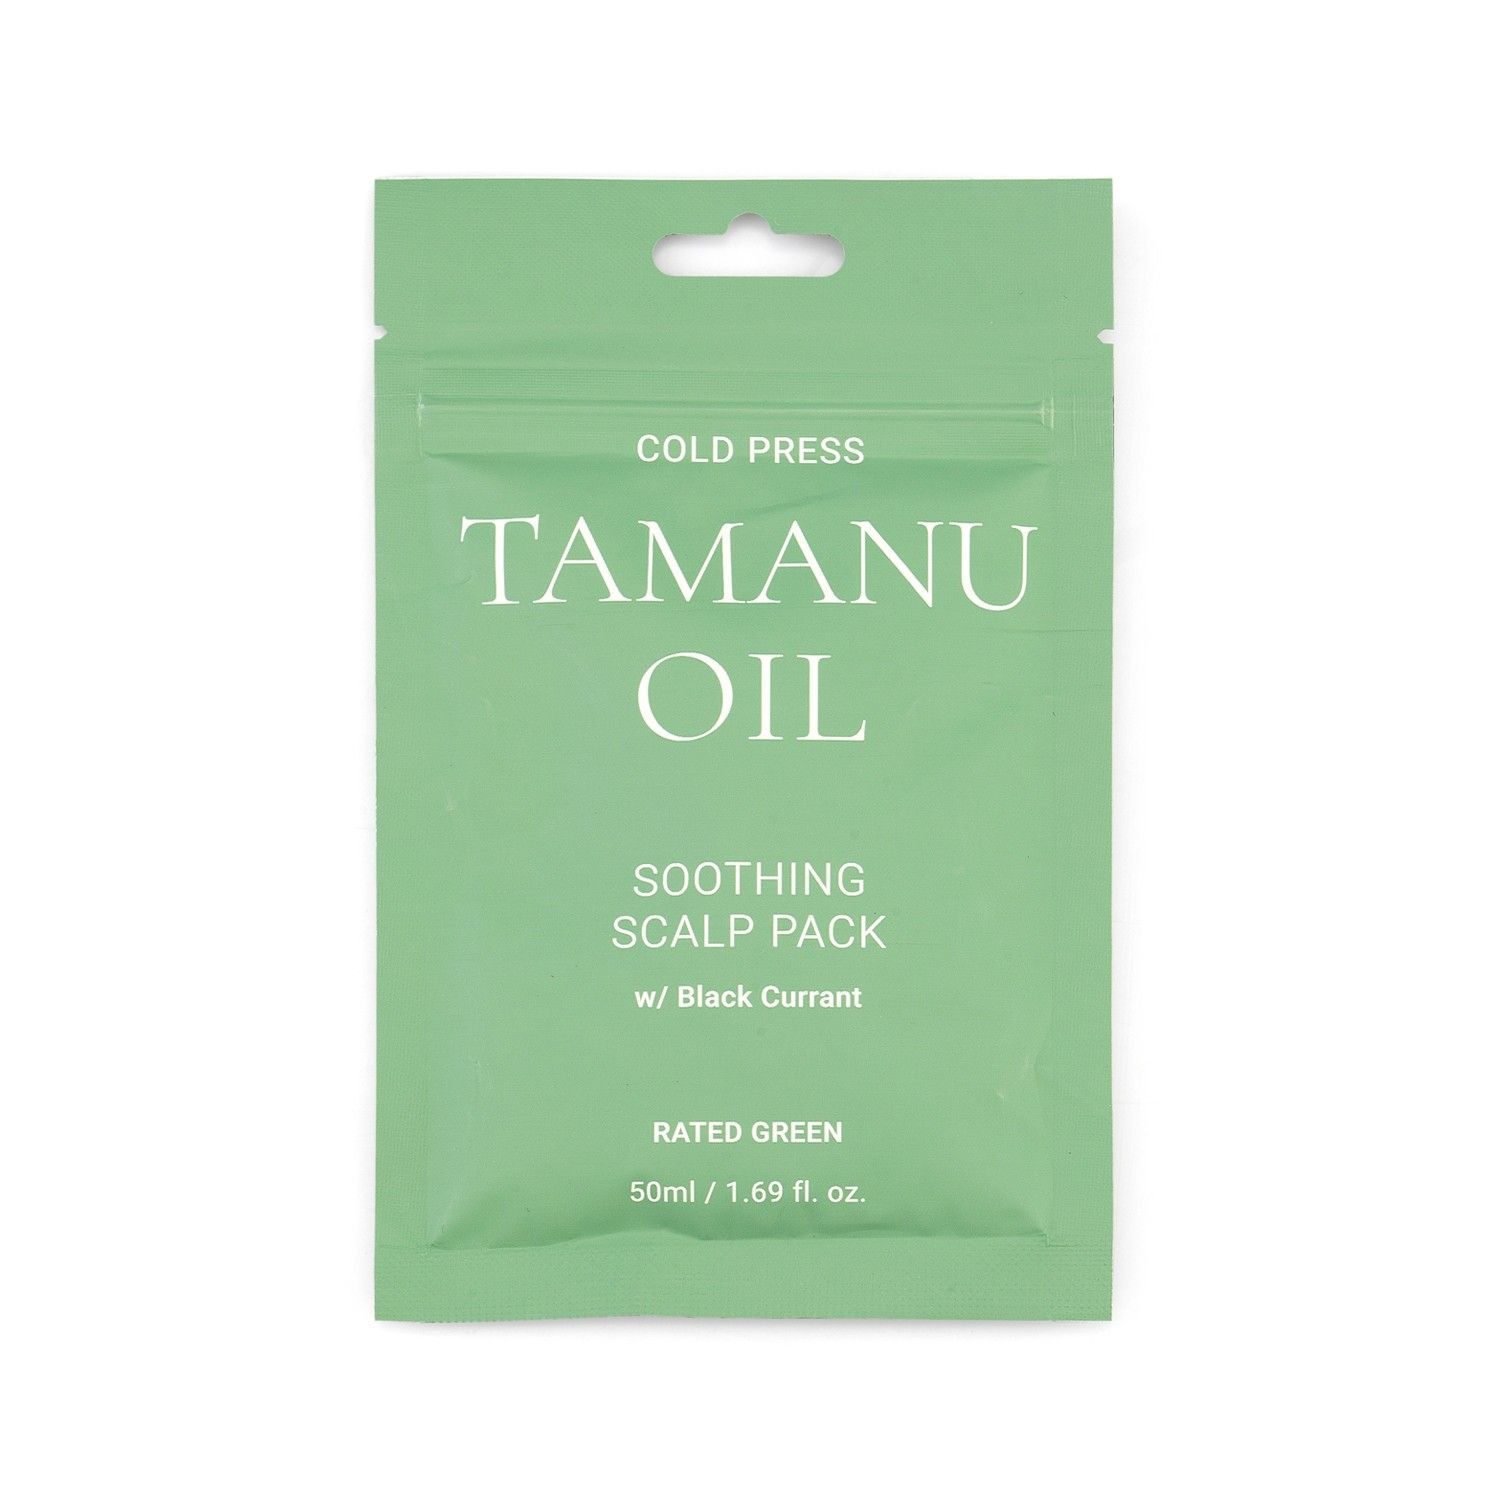 RATED GREEN Cold Press Tamanu Oil Soothing Scalp Pack